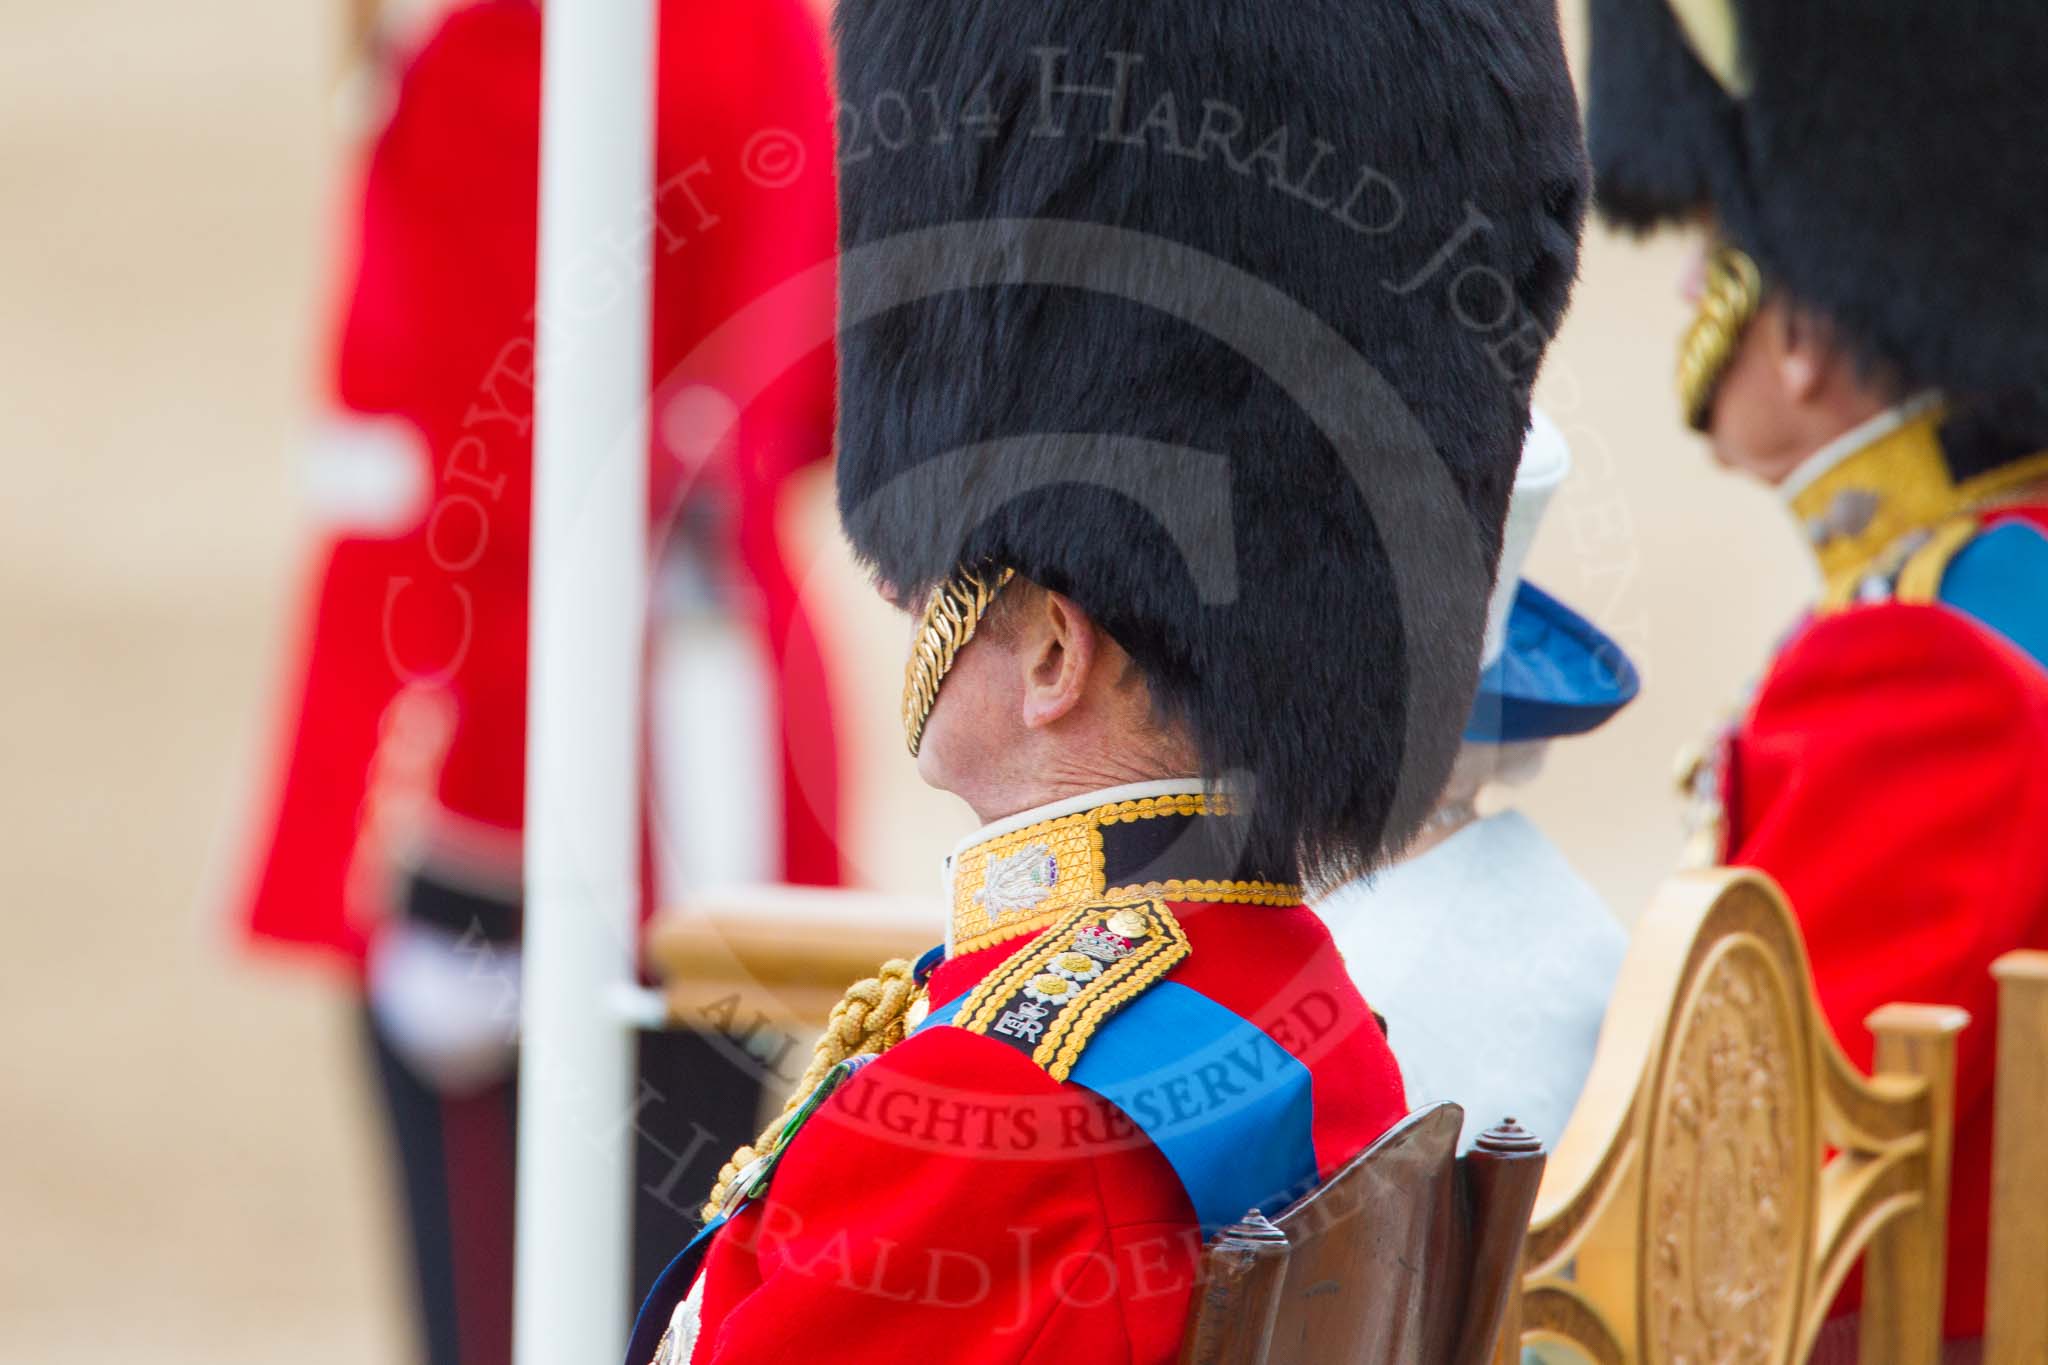 Trooping the Colour 2014.
Horse Guards Parade, Westminster,
London SW1A,

United Kingdom,
on 14 June 2014 at 11:11, image #457